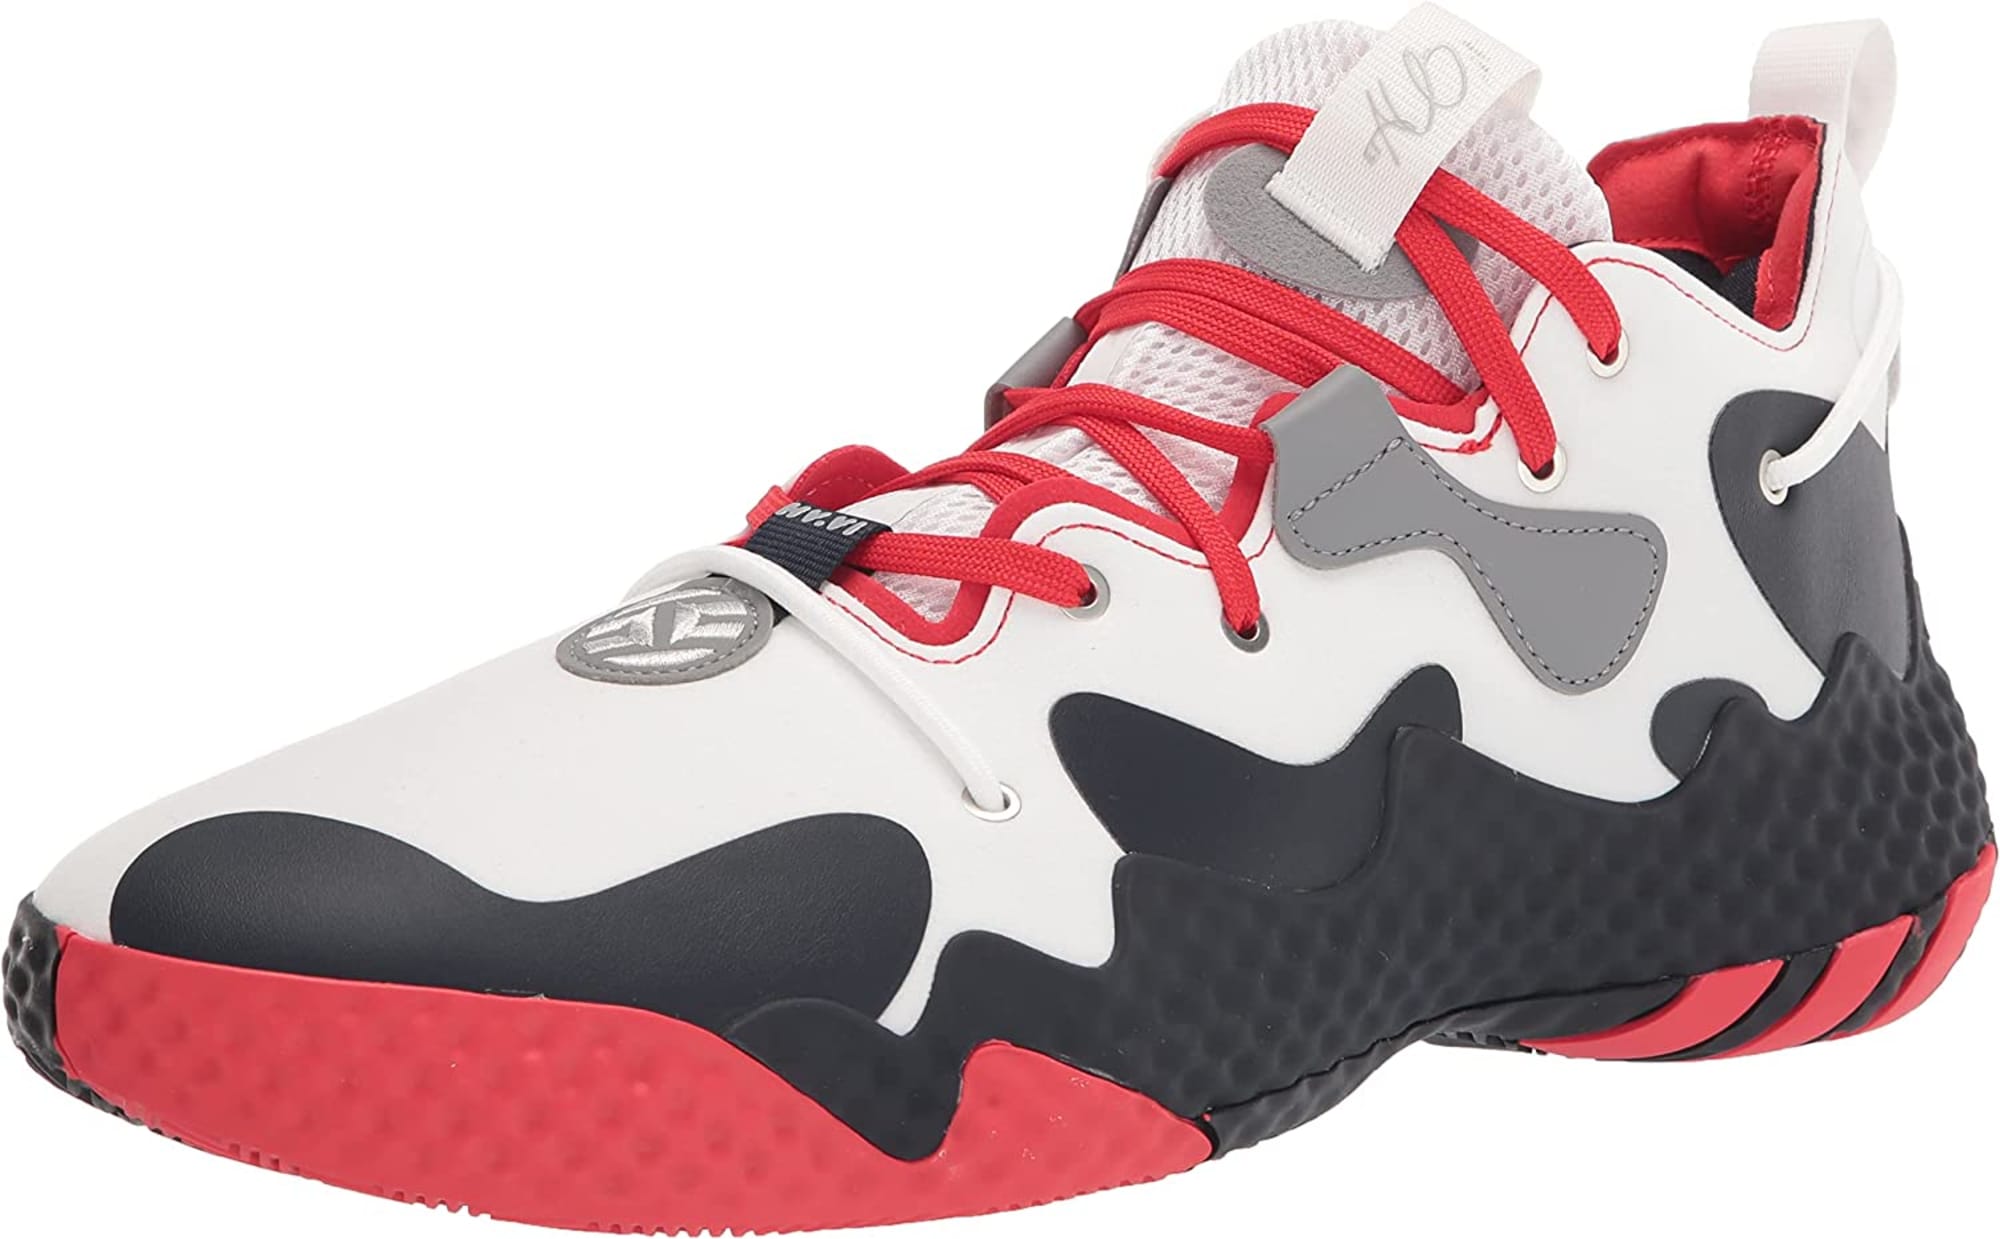 Top 10 Basketball Shoes of 2023 to Get Your Feet Ready for the Court